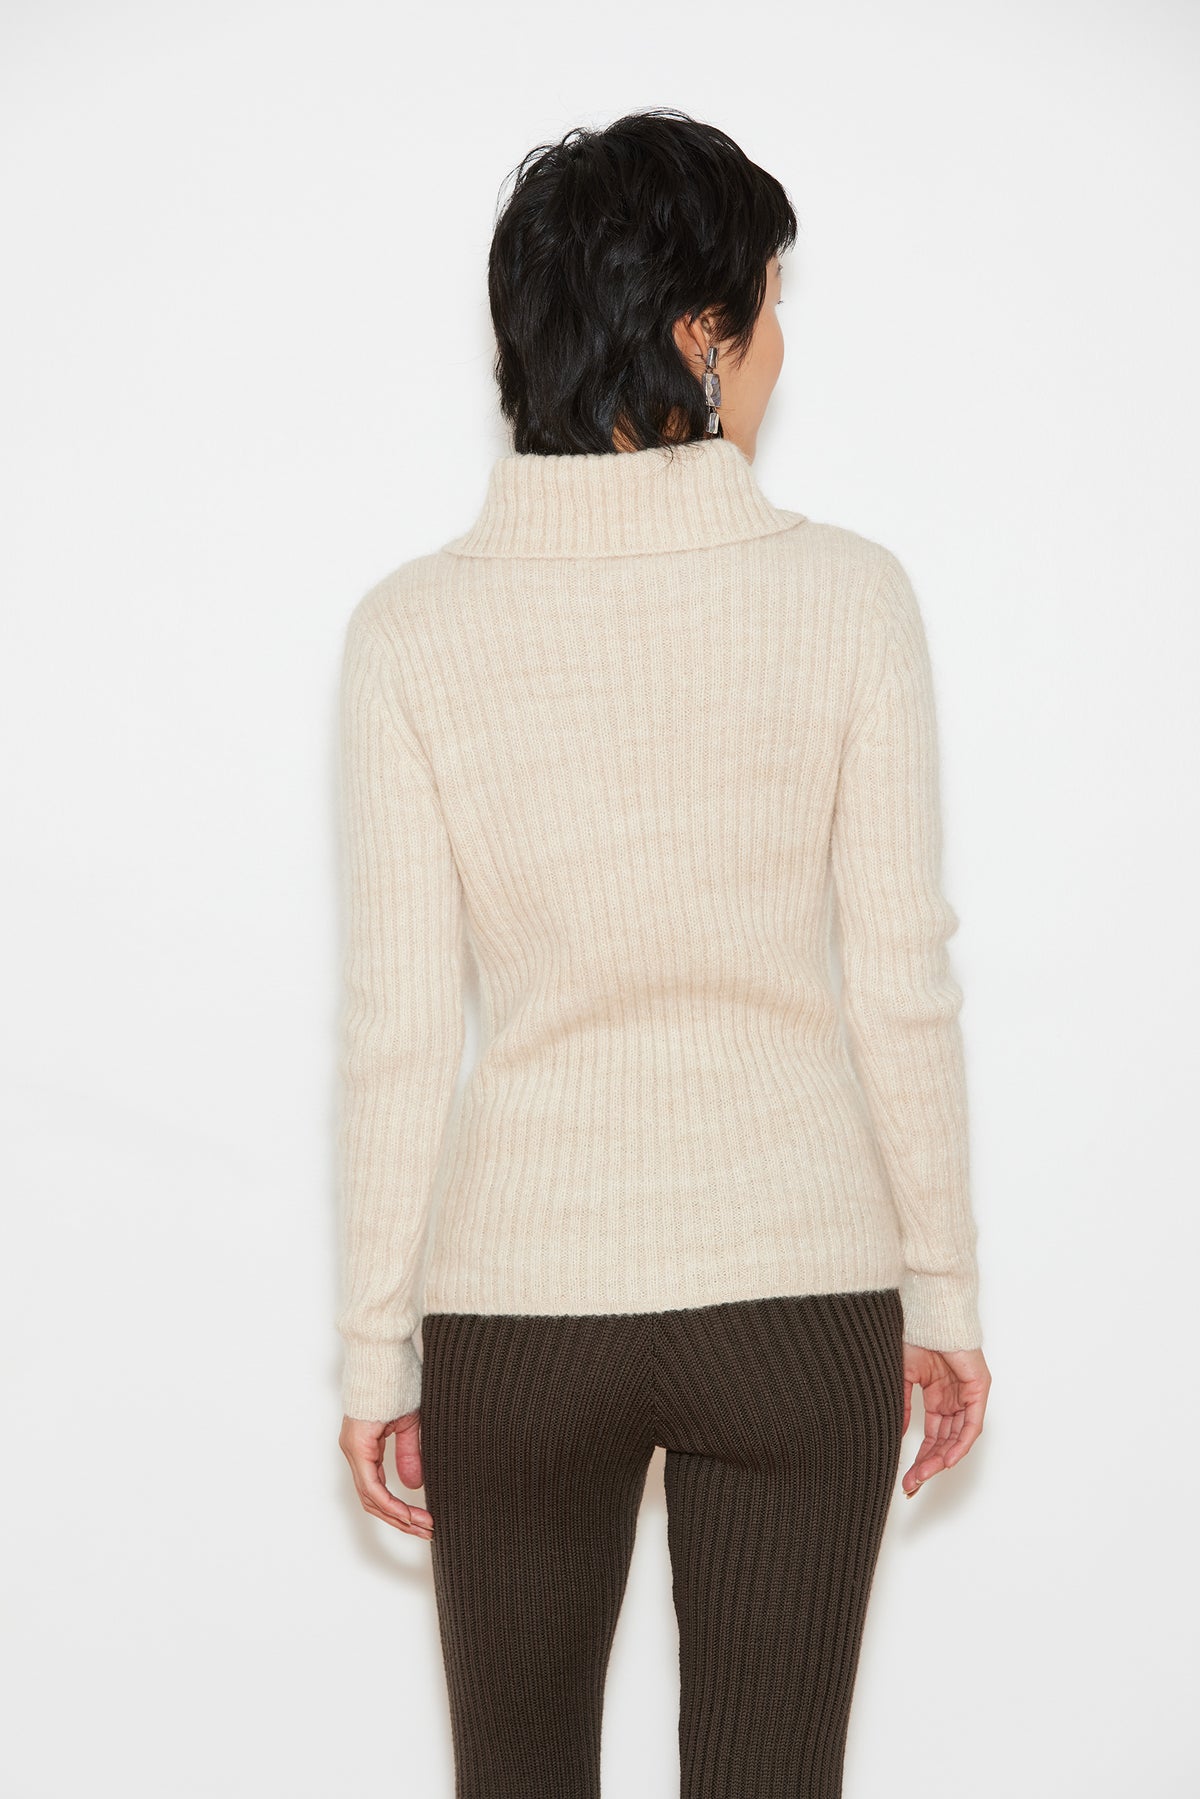 Adult Ines Sweater - String